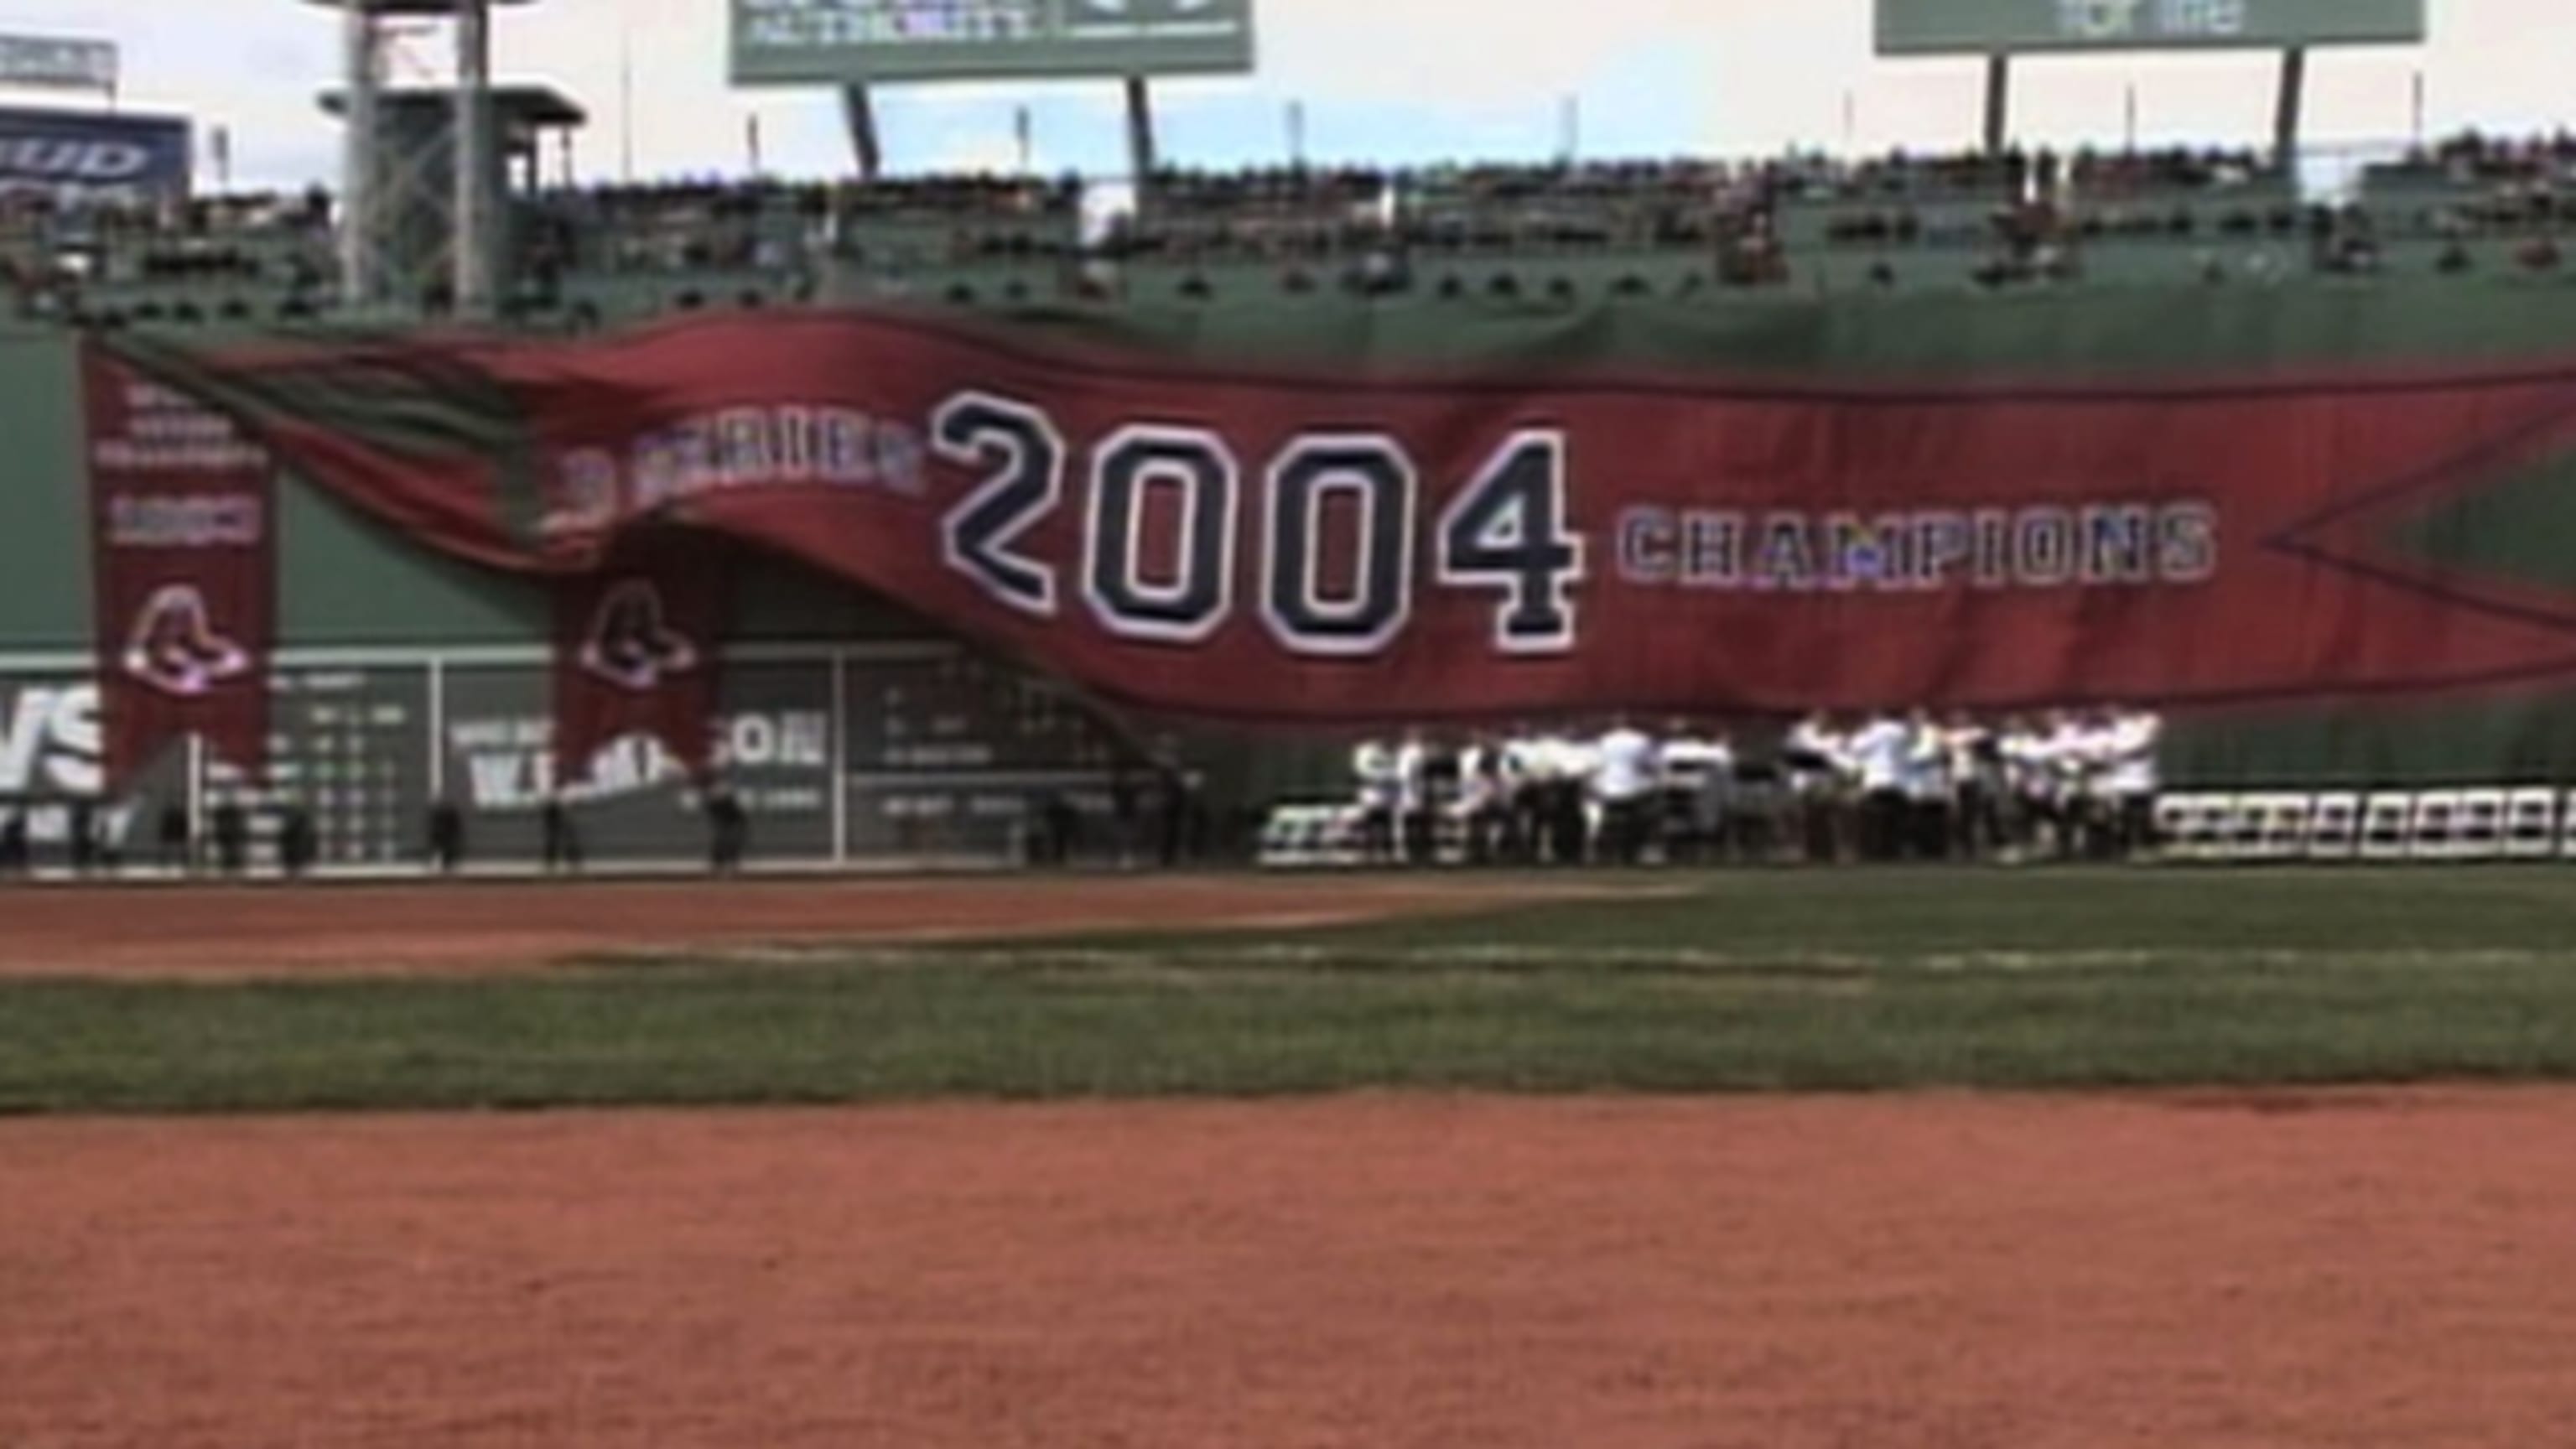 Boston Red Sox World Series Champions Banners Black and White Ph T